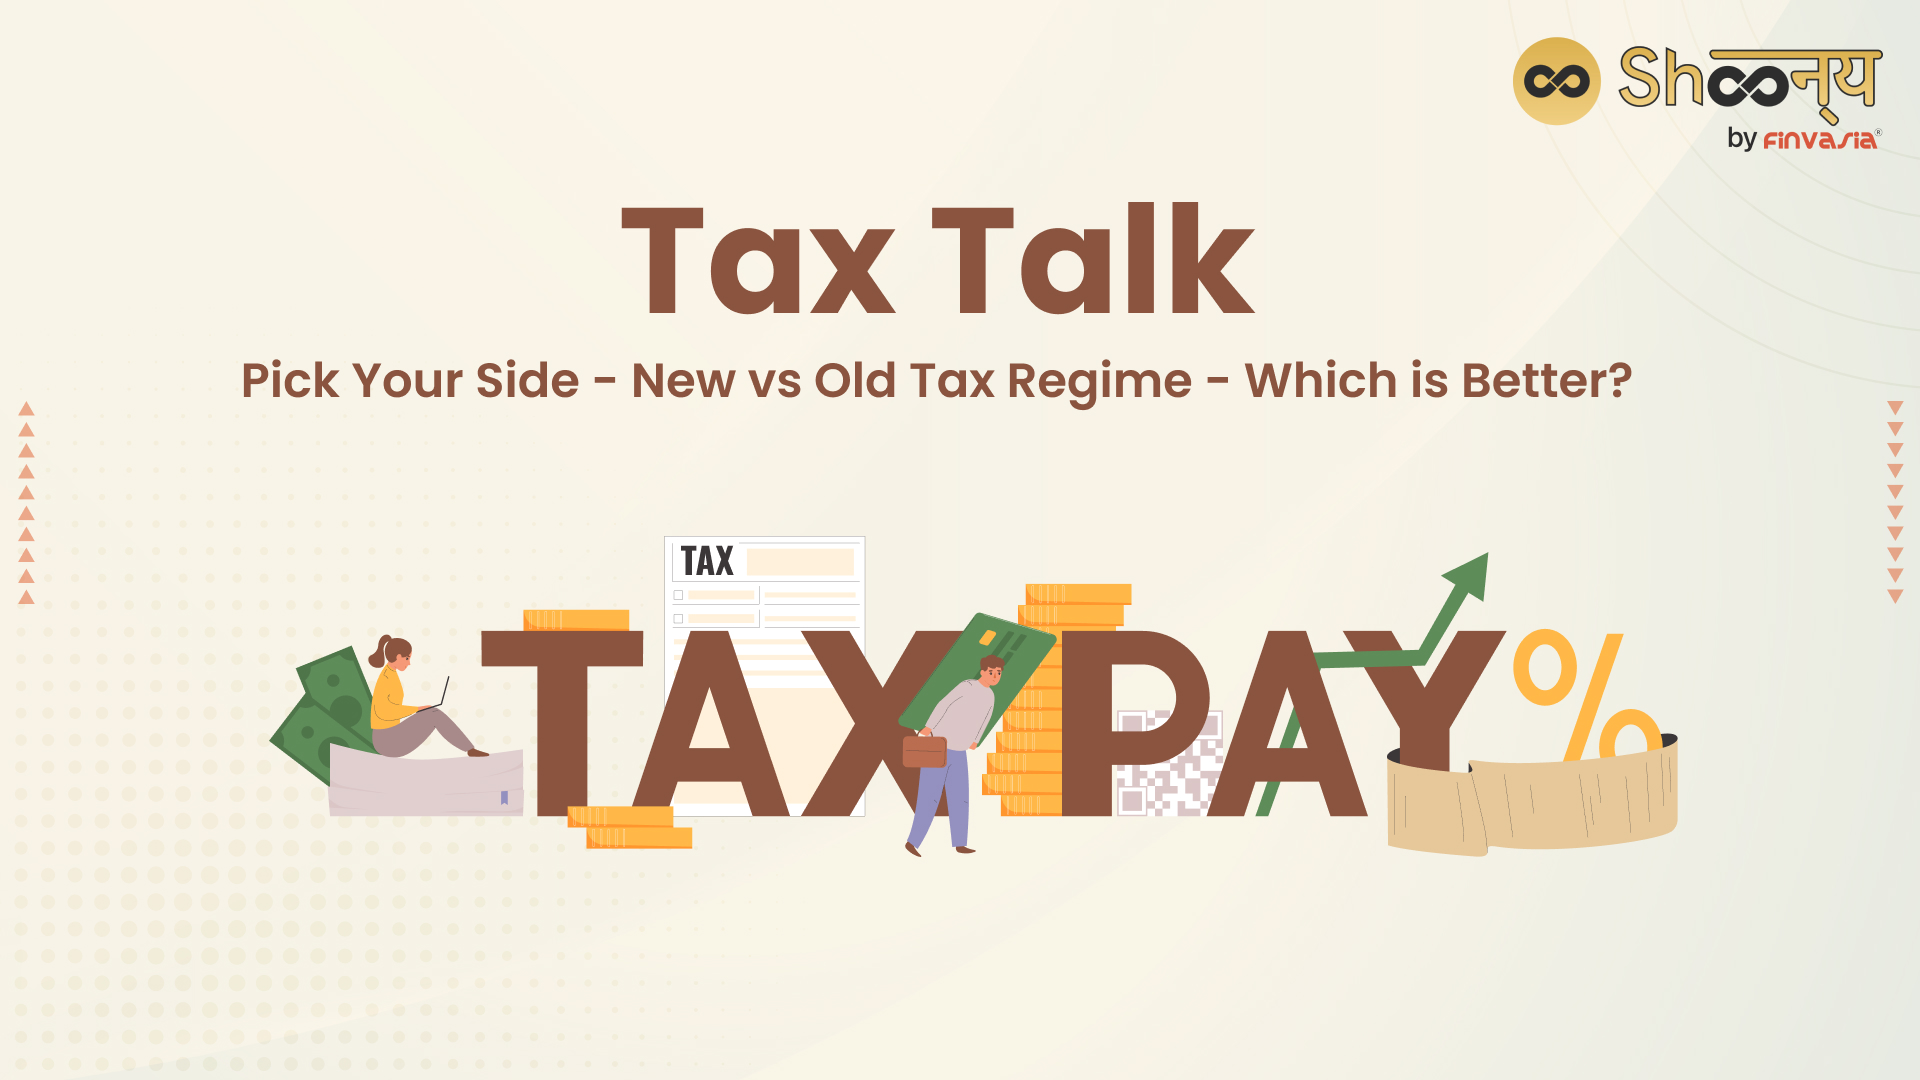 New vs Old Tax Regime: Which is Better?